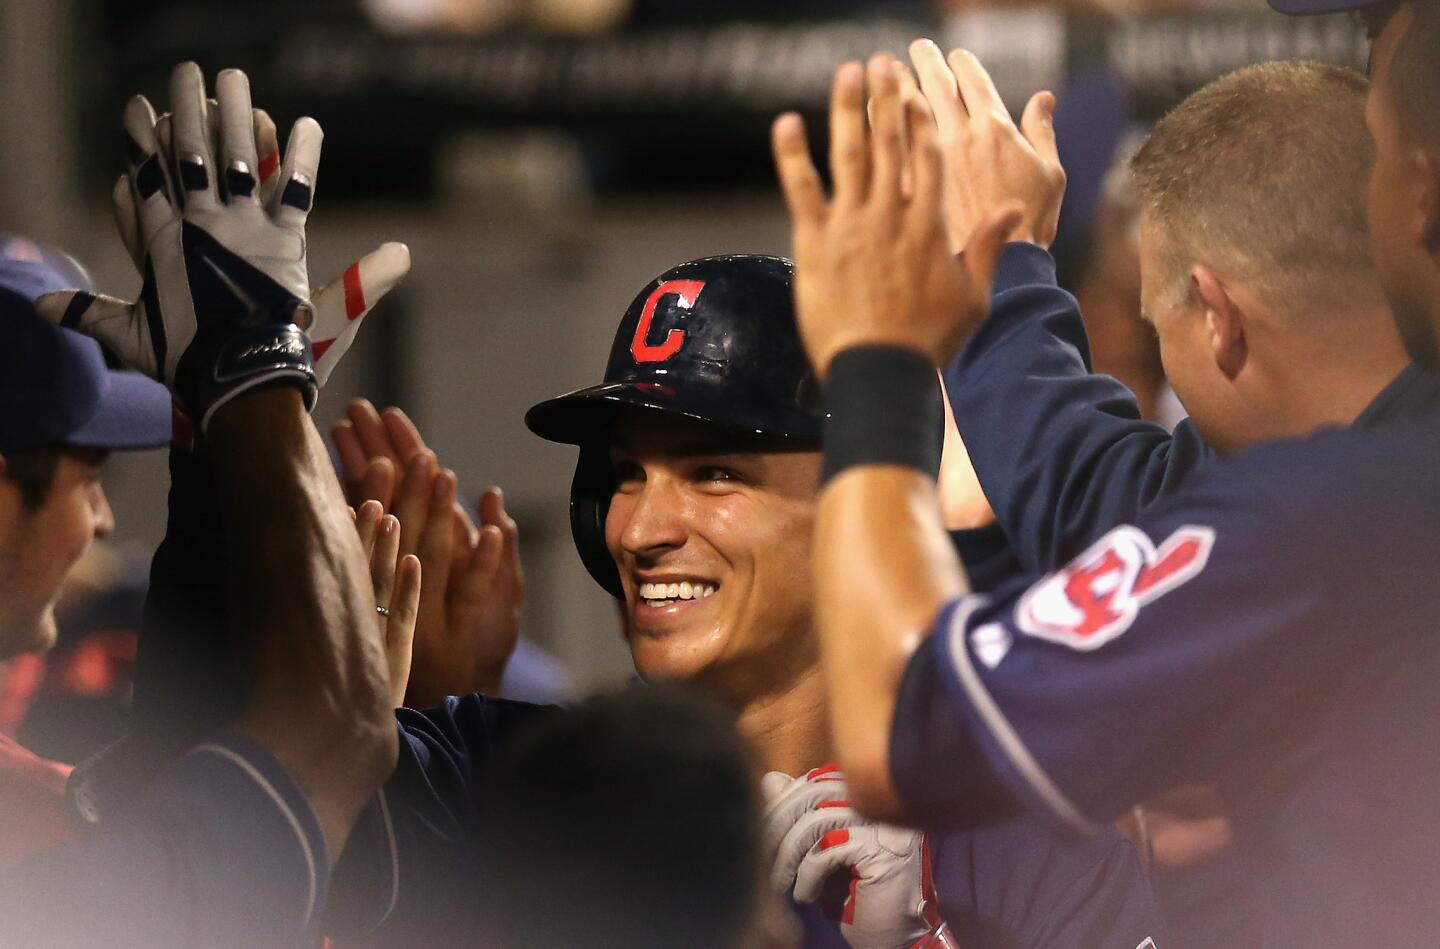 The Indians' Zach Walters is greeted by teammates in the dugout after hitting a two-run home run in the top of the 10th inning.